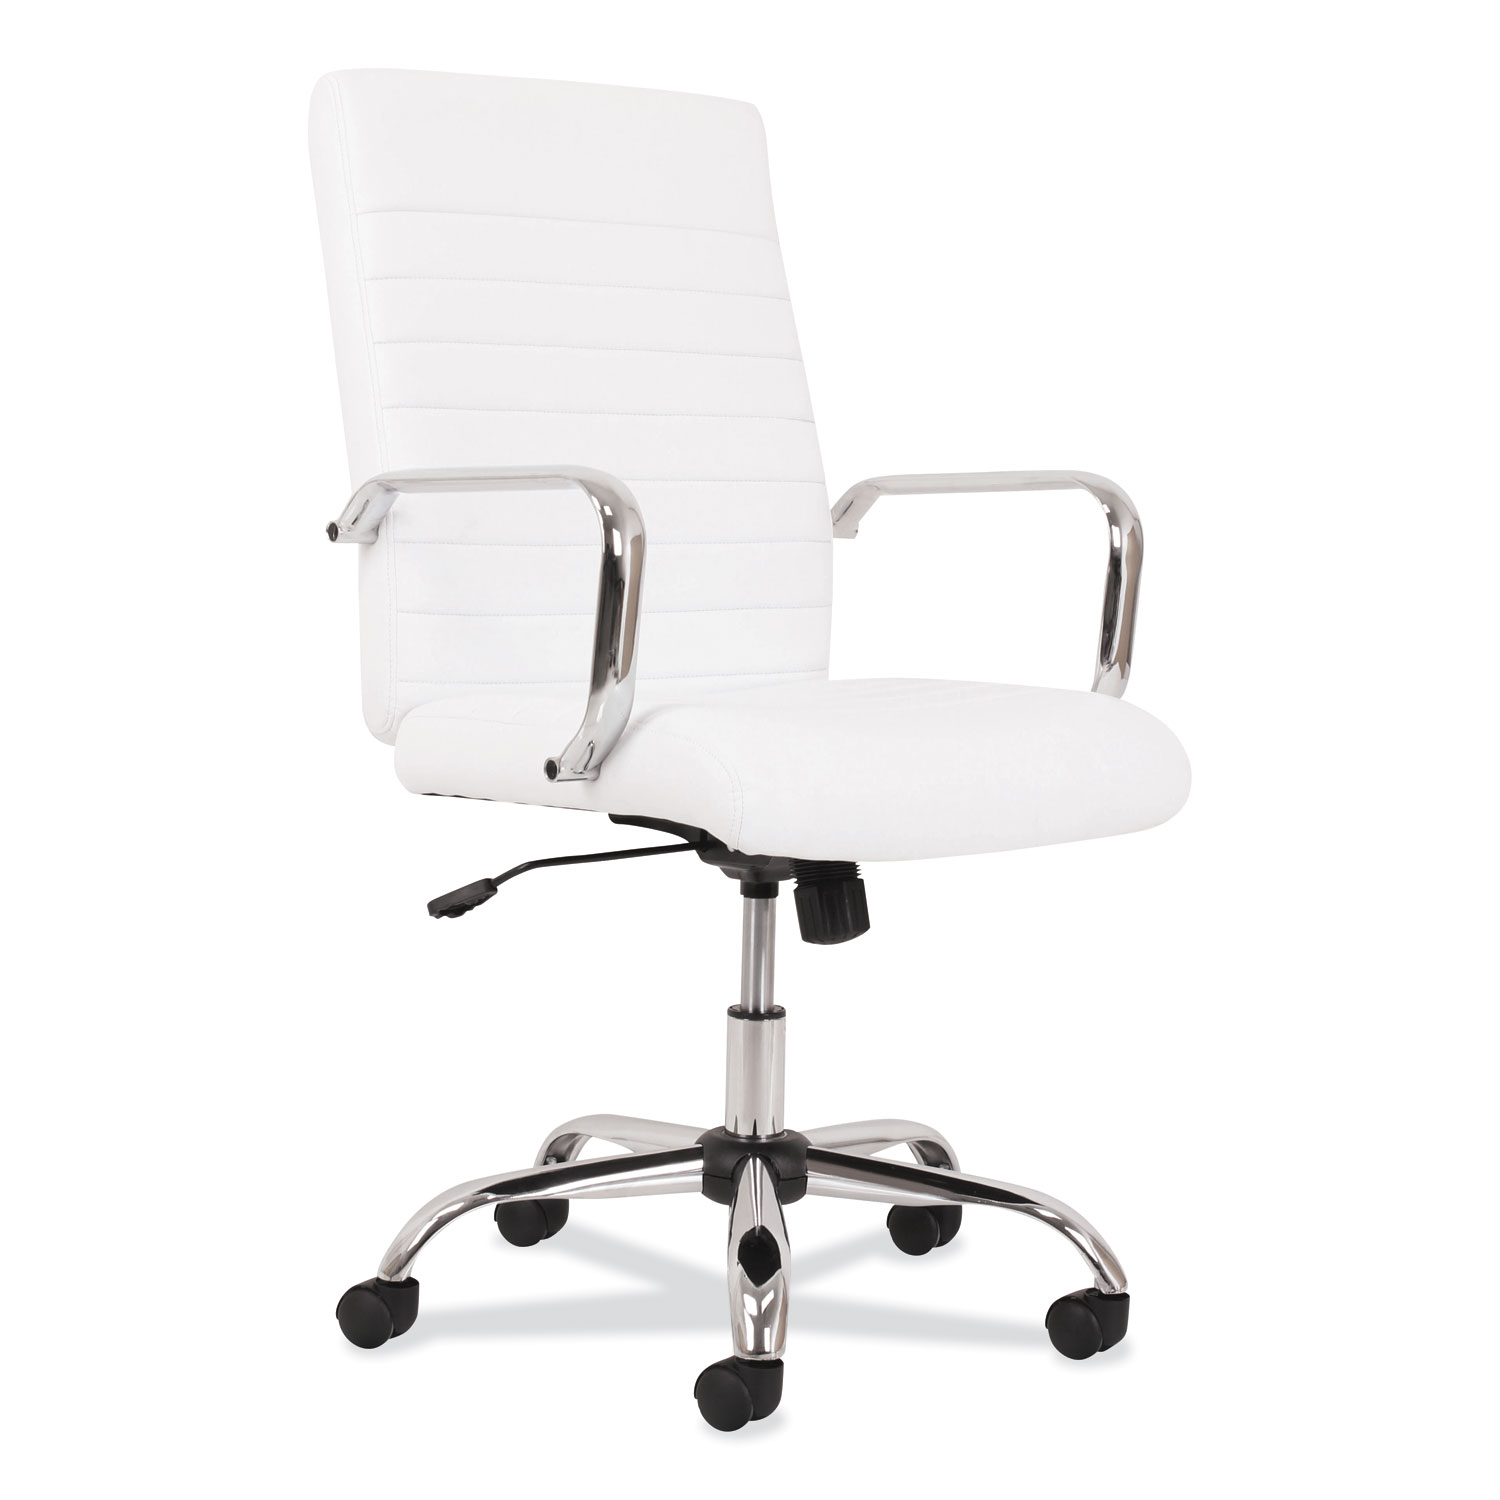  Sadie BSXVST513 5-Thirteen Mid-Back Executive Leather Chair, Supports up to 250 lbs., White Seat/Back, Chrome Base (BSXVST513) 